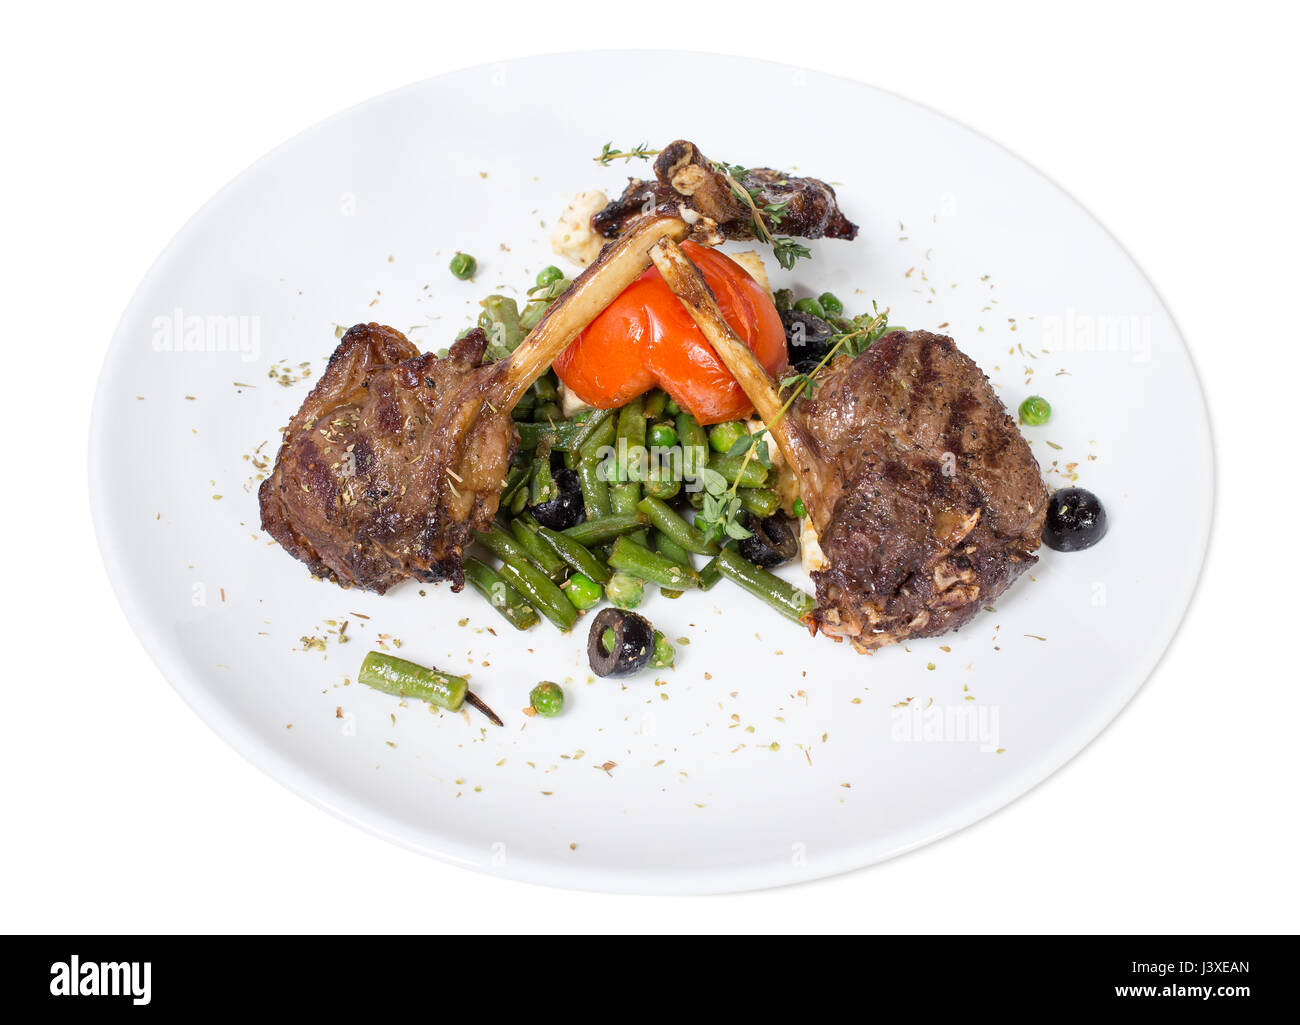 Grilled beef ribs with french beans and tomatoes. Isolated on a white background. Stock Photo